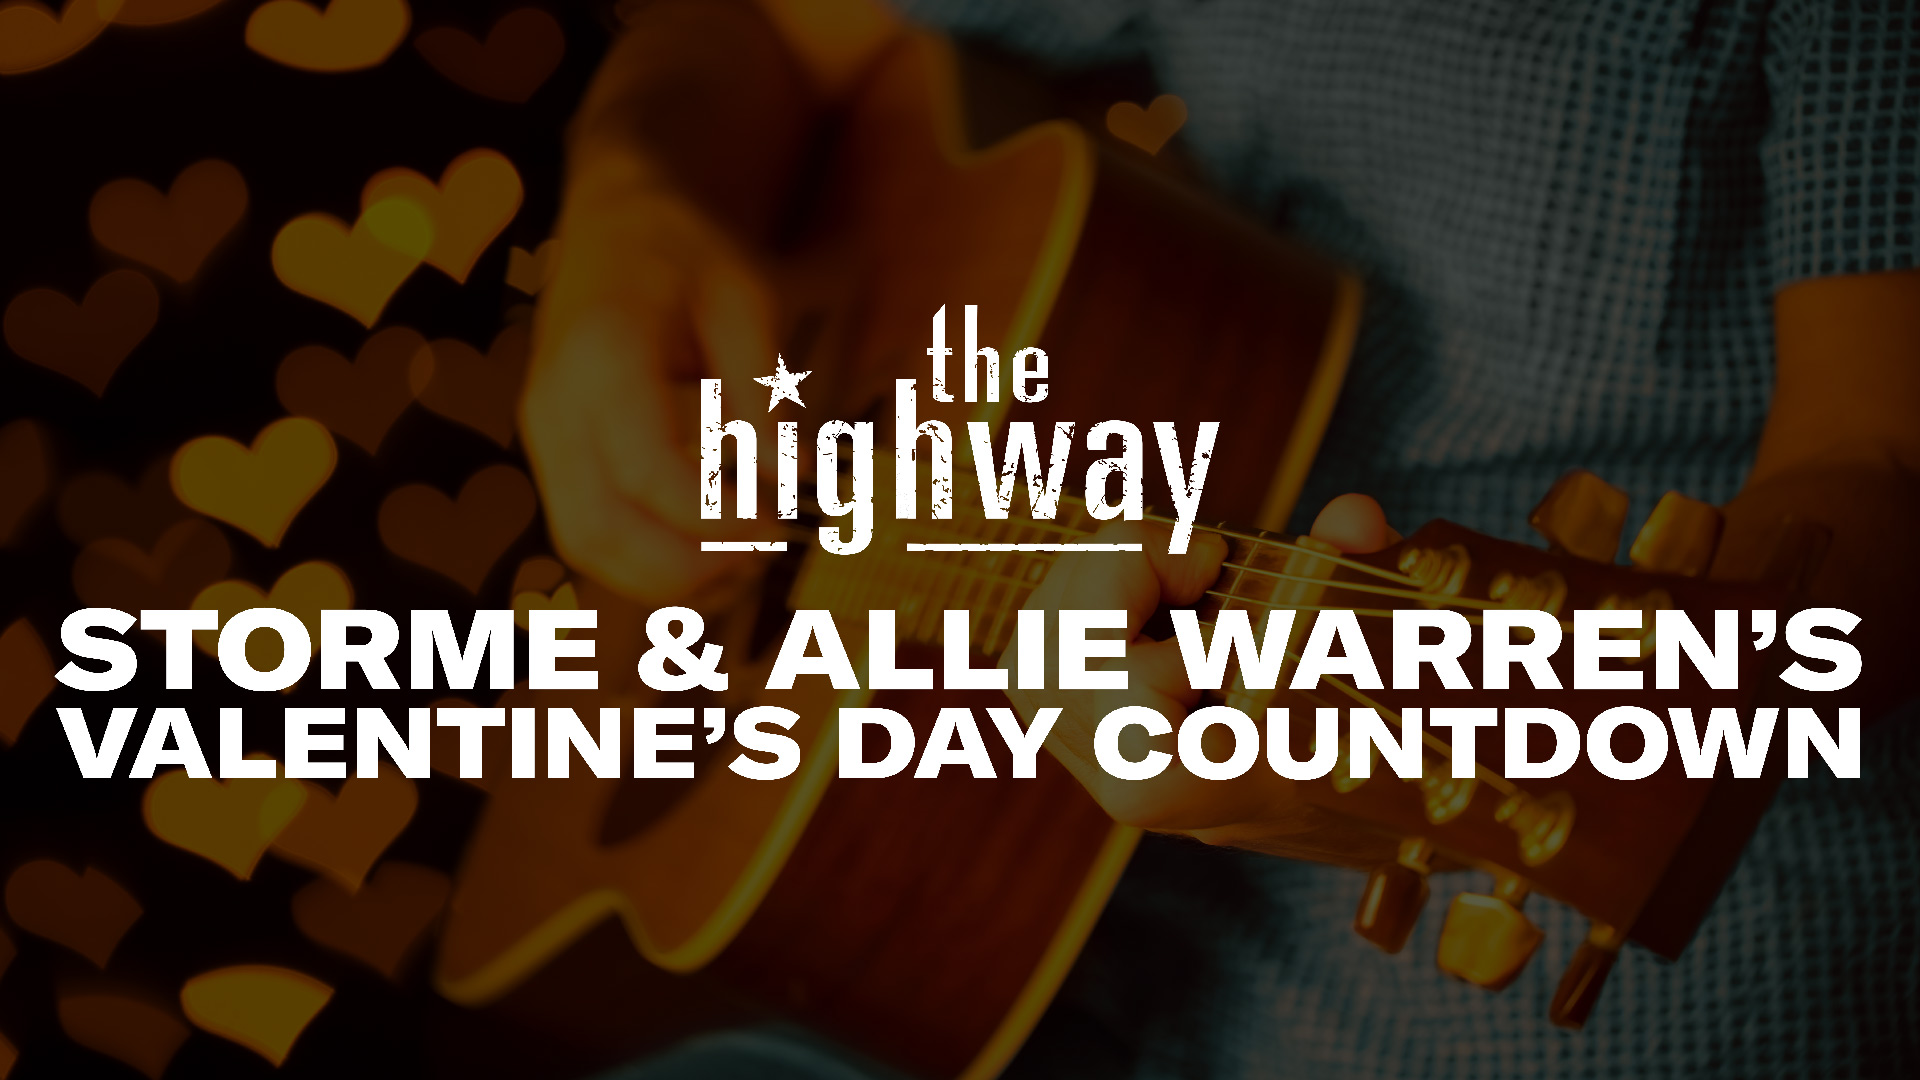 Storme and Allie Warren's Valentine's Day Countdown The Highway